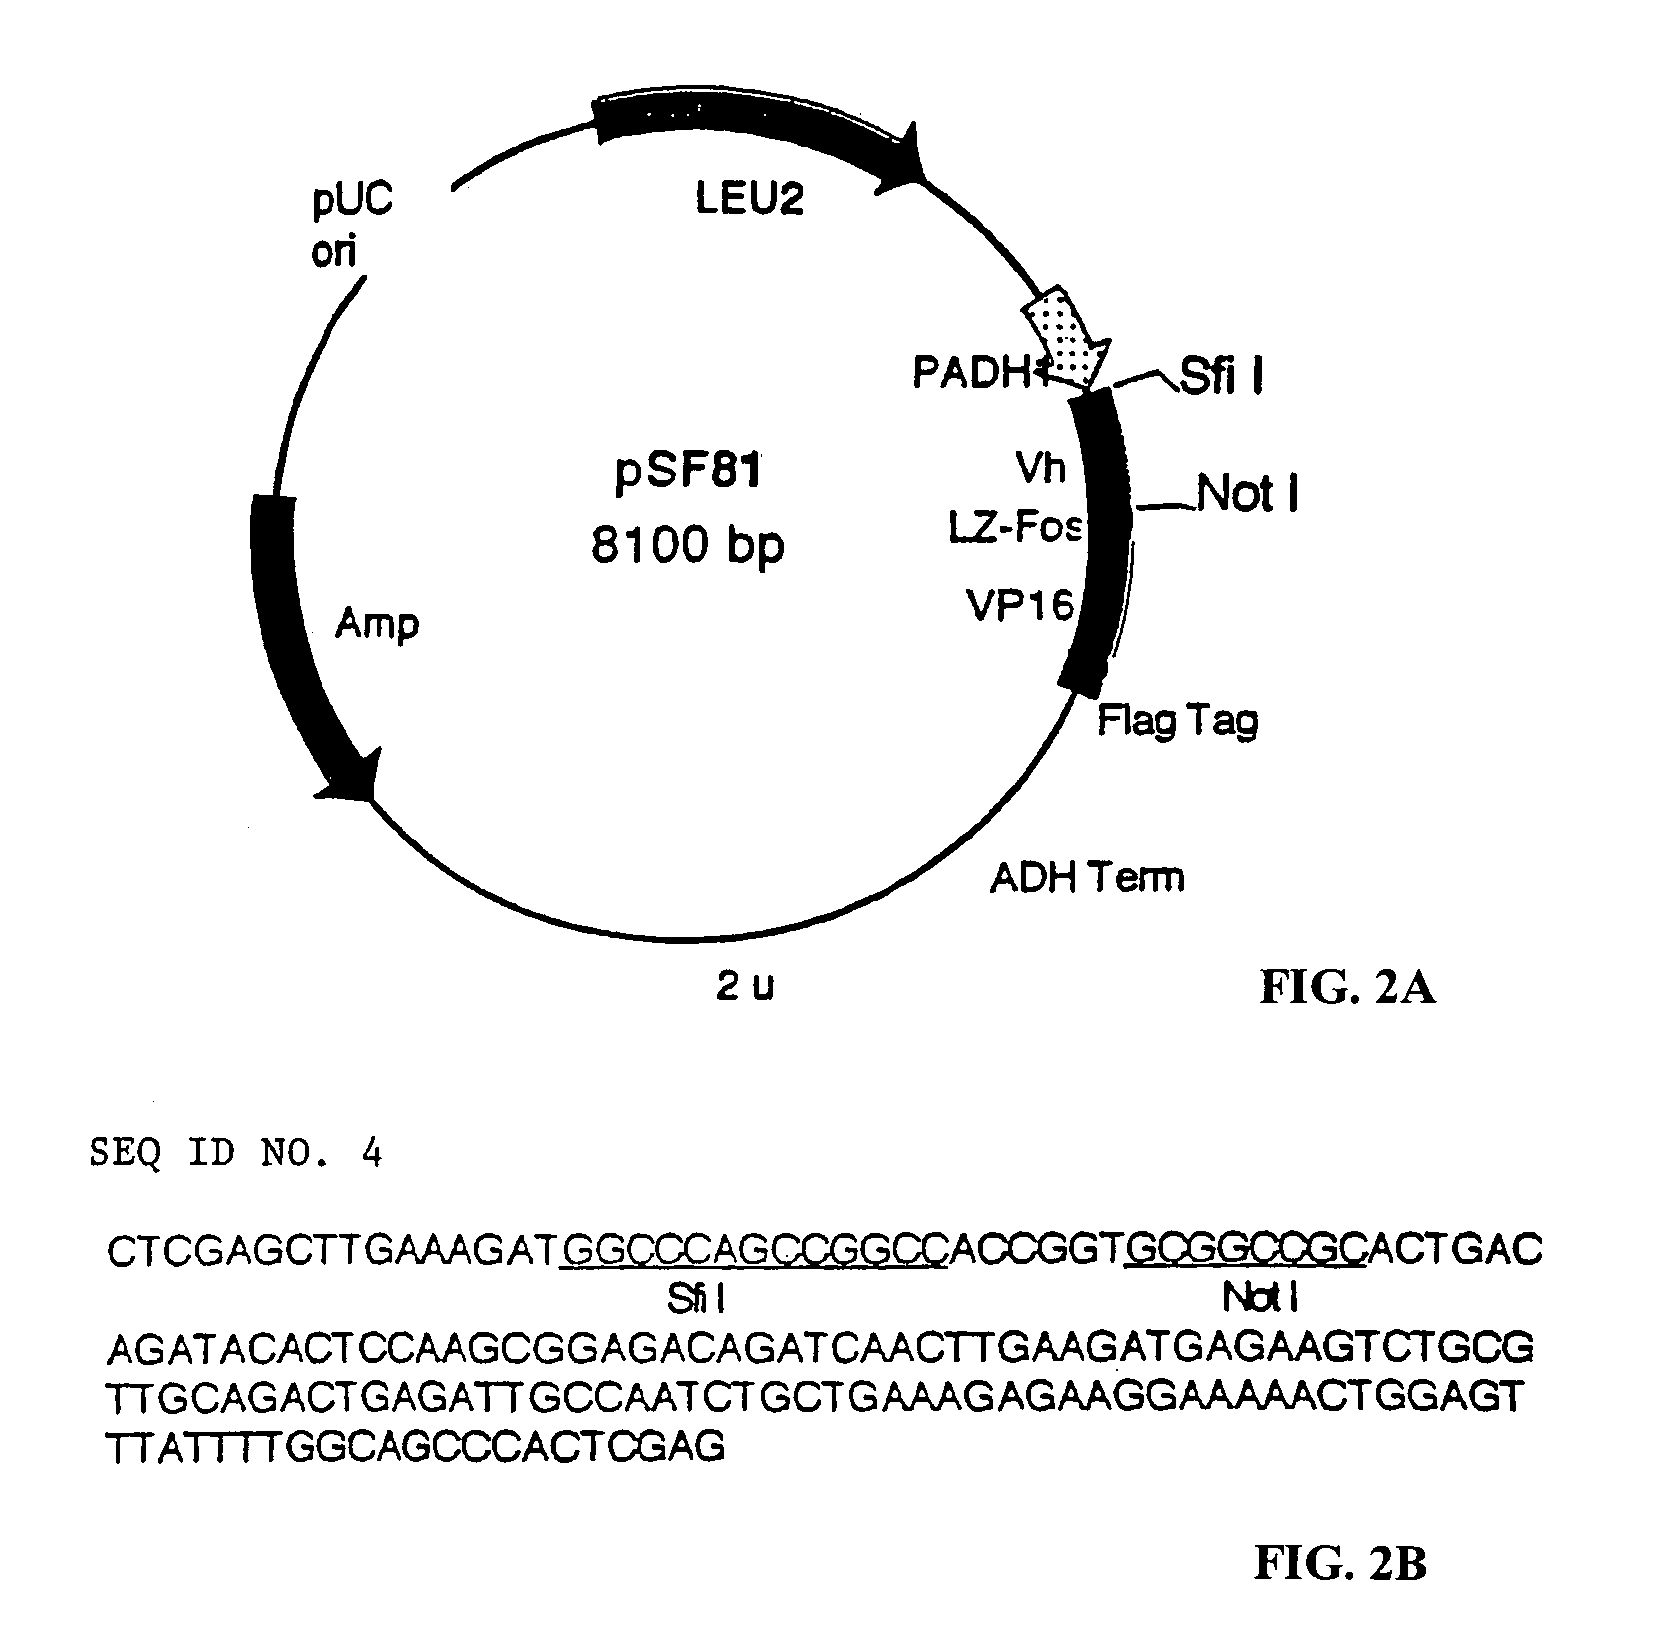 Compositions and methods for generating antigen-binding units